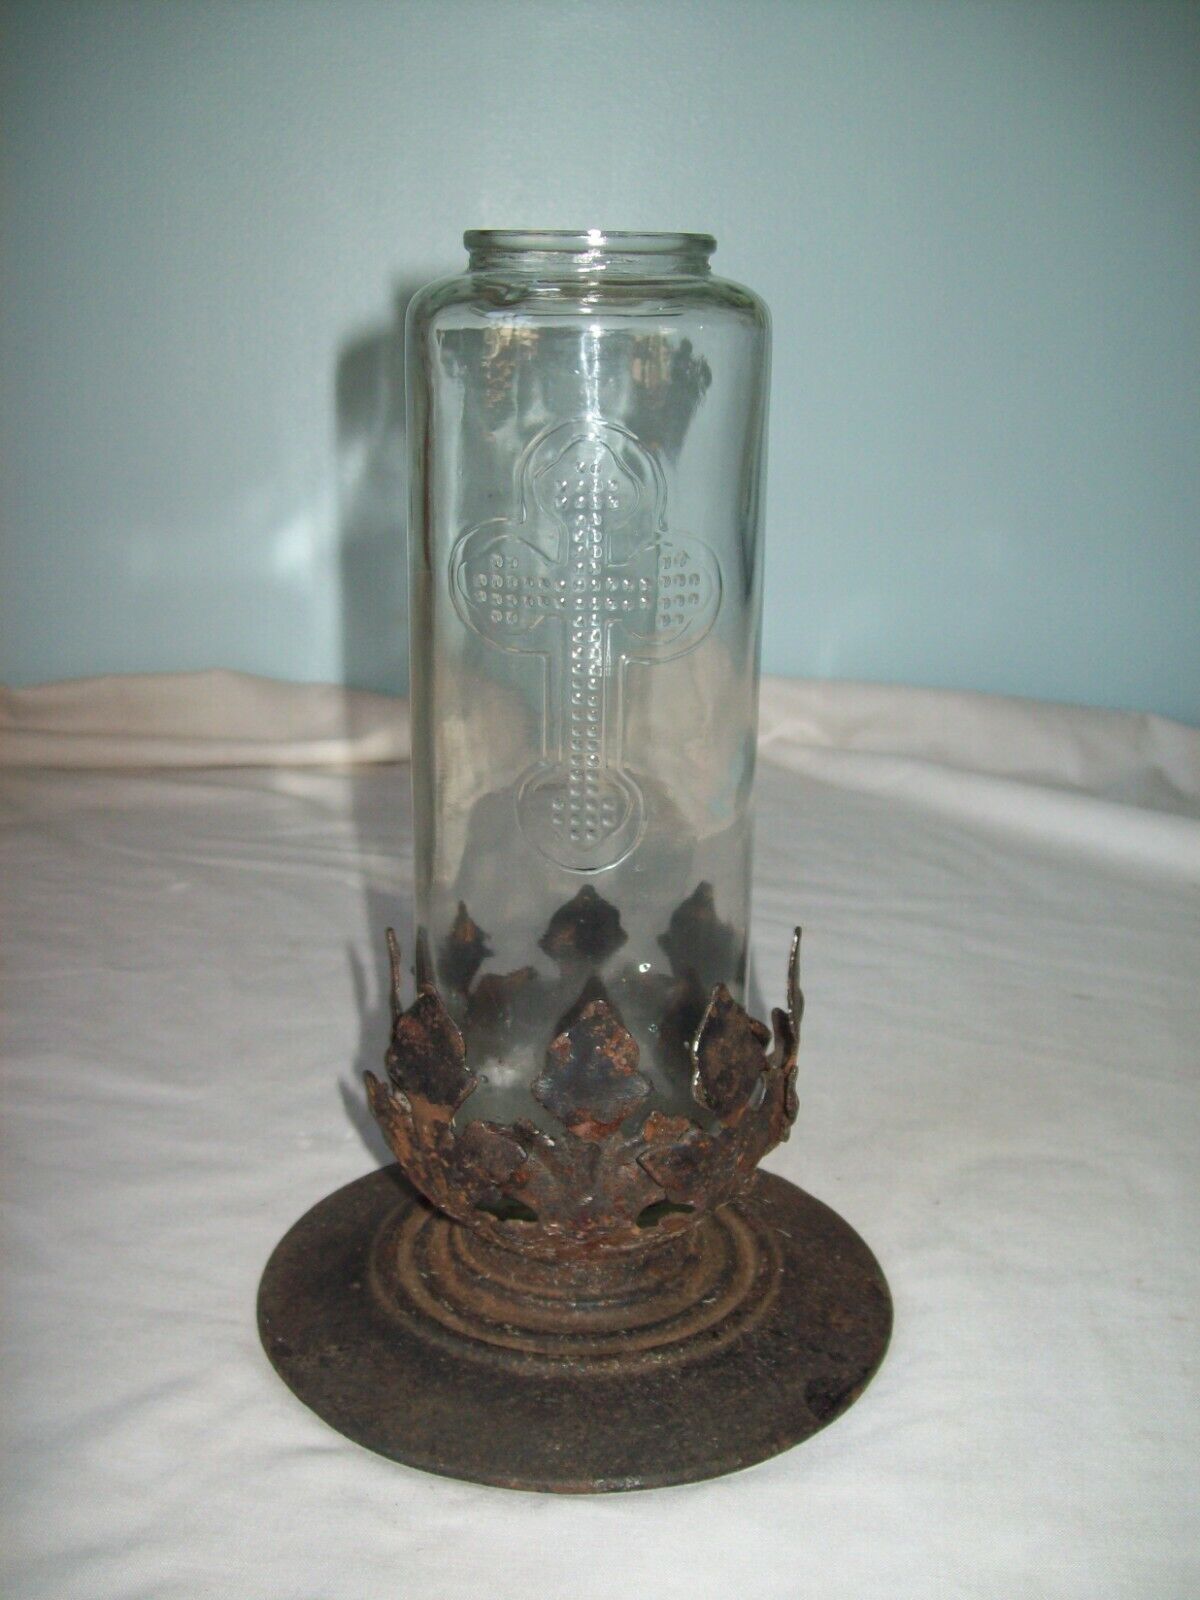  7 day prayer religious candle glass holder  w/  embossed cross and iron base 